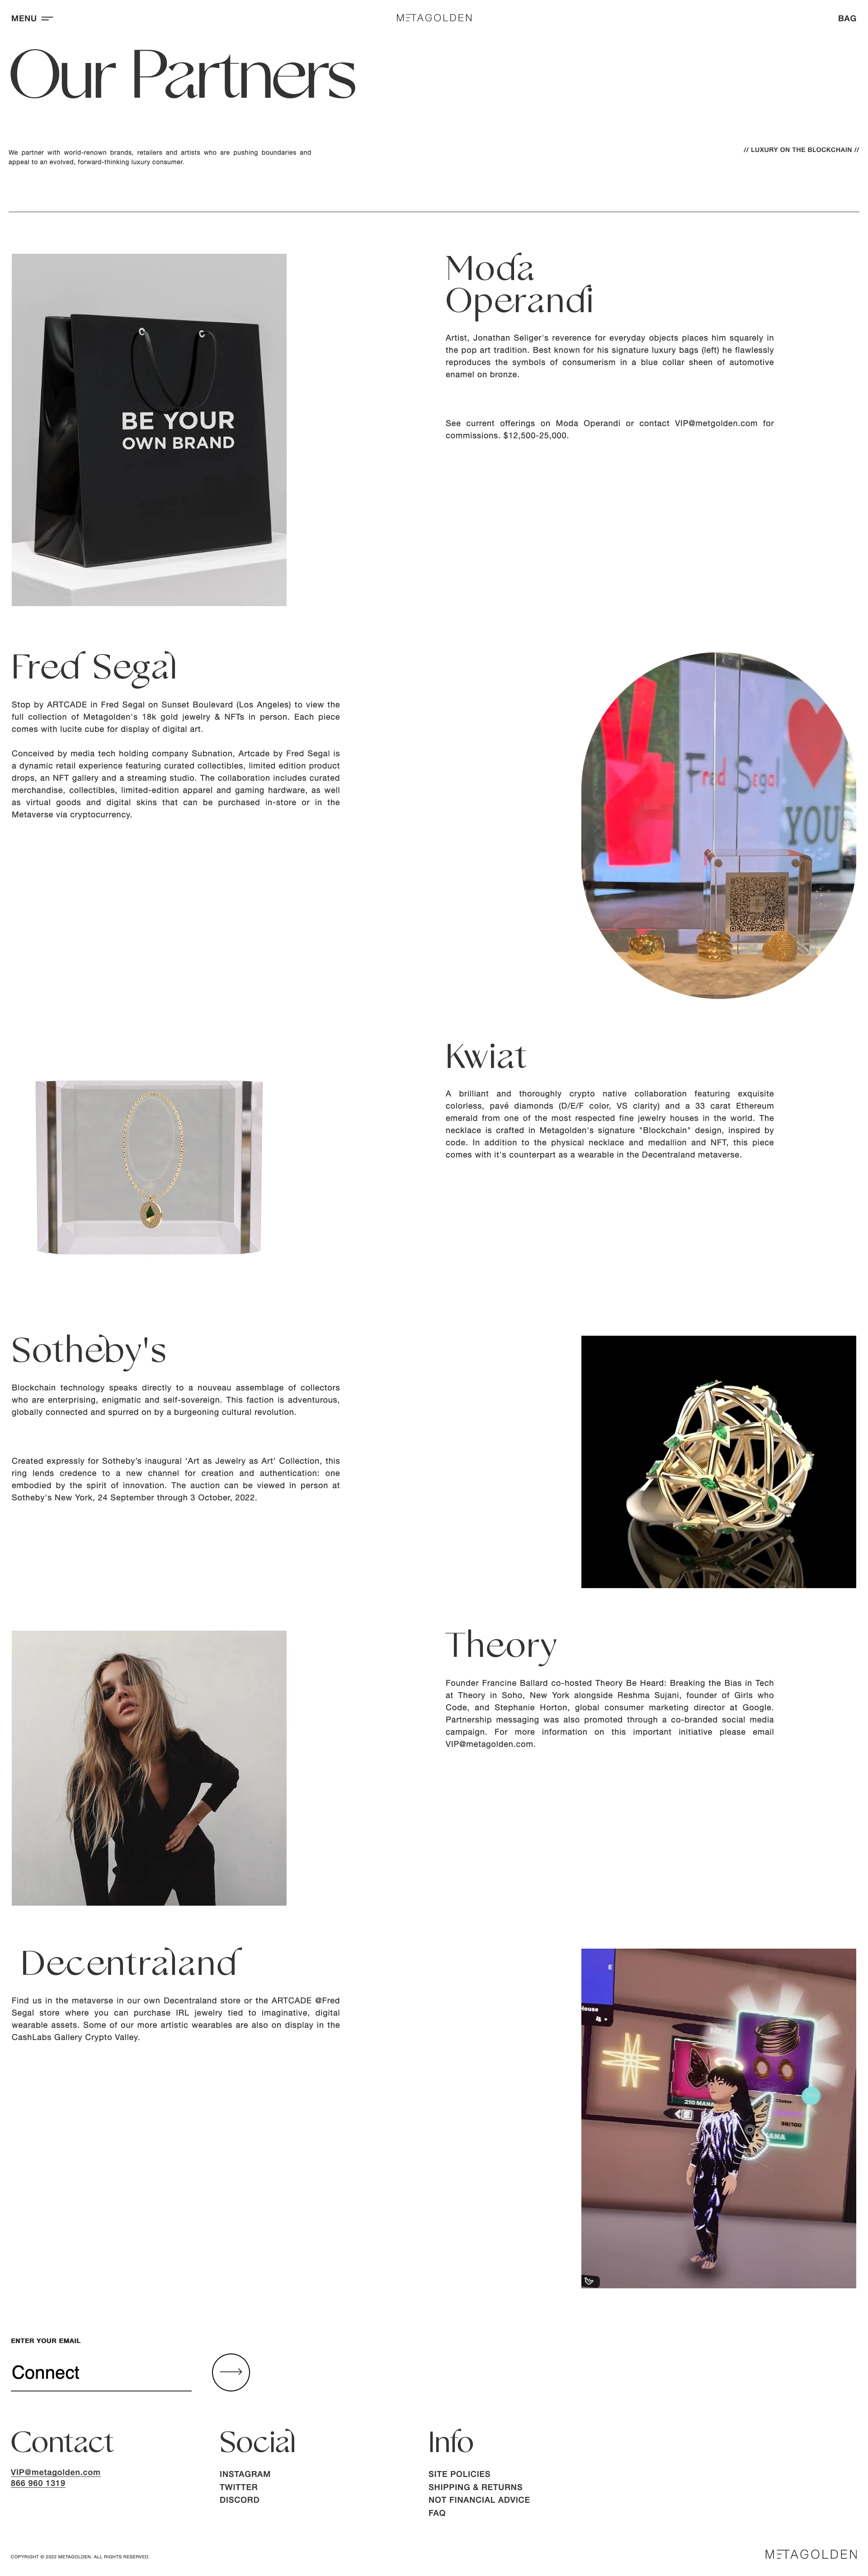 Metagolden Landing Page Example: Curated offerings for an evolved consumer. We marry the digital with the physical in the luxury space through blockchain technology.